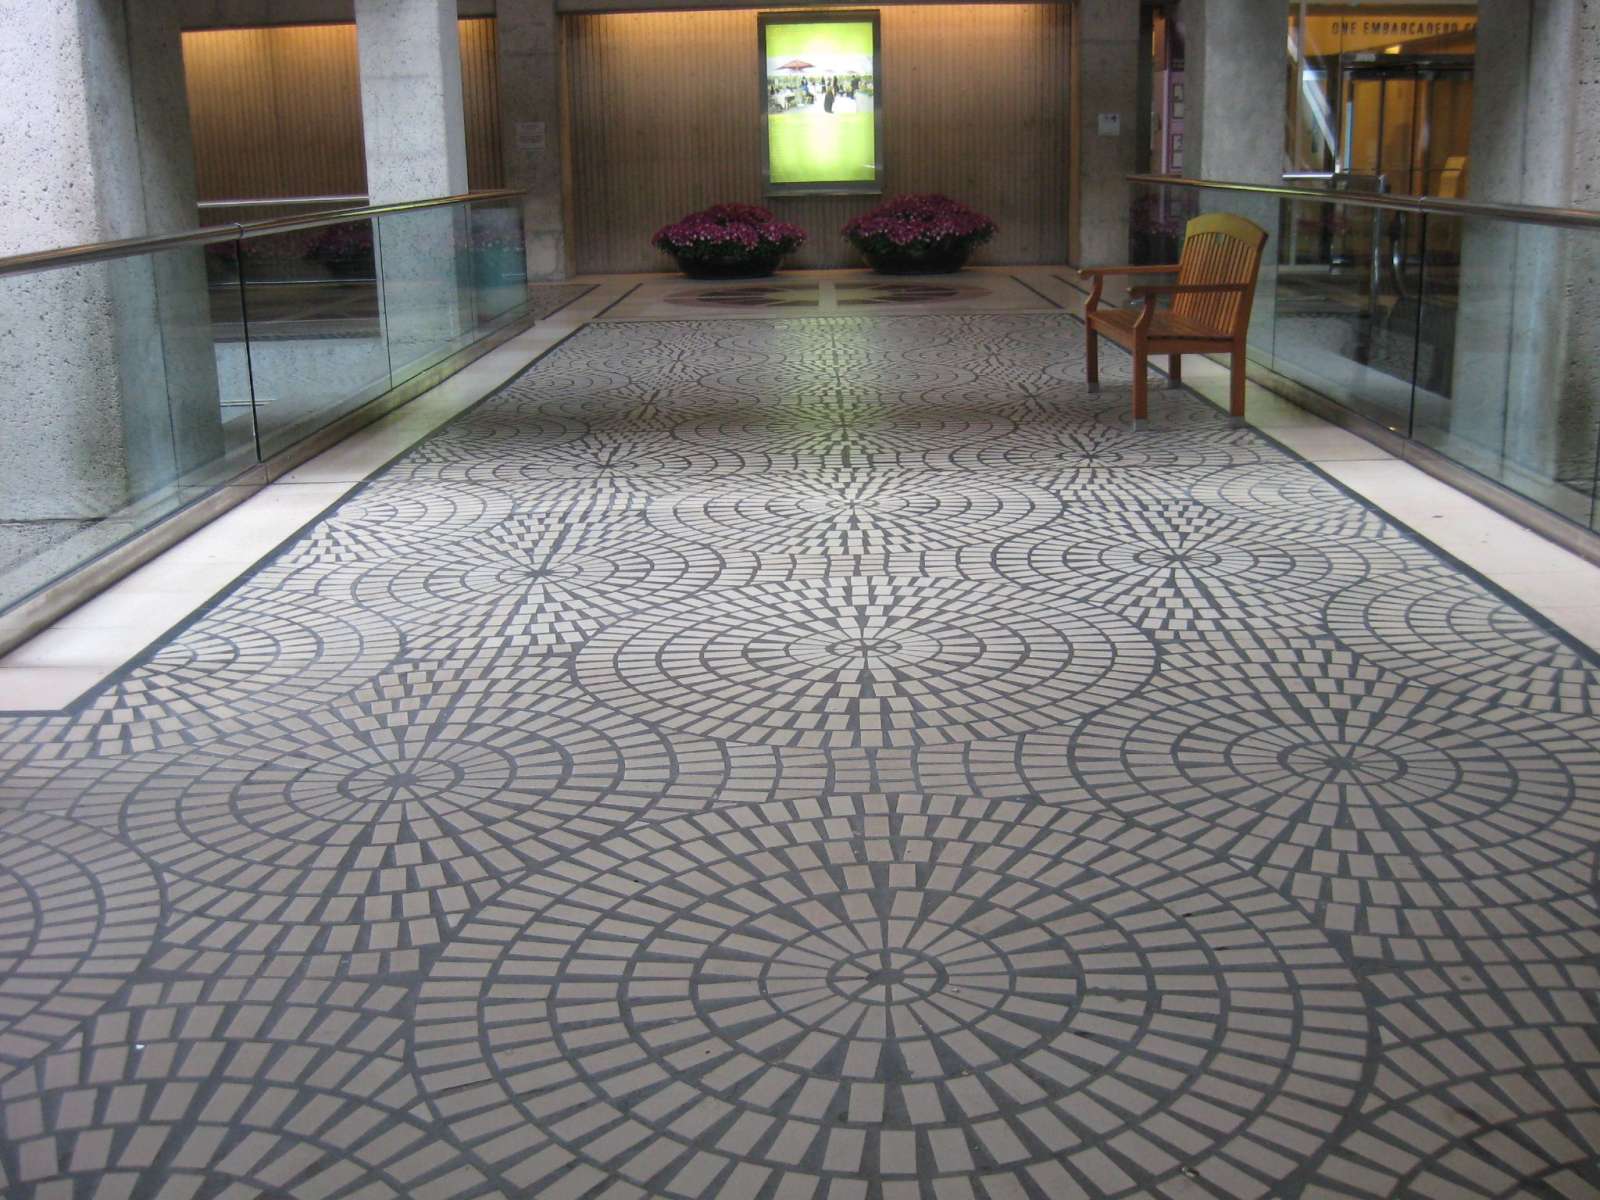 10 Useful Floor Tile Patterns To Improve Home Interior Look